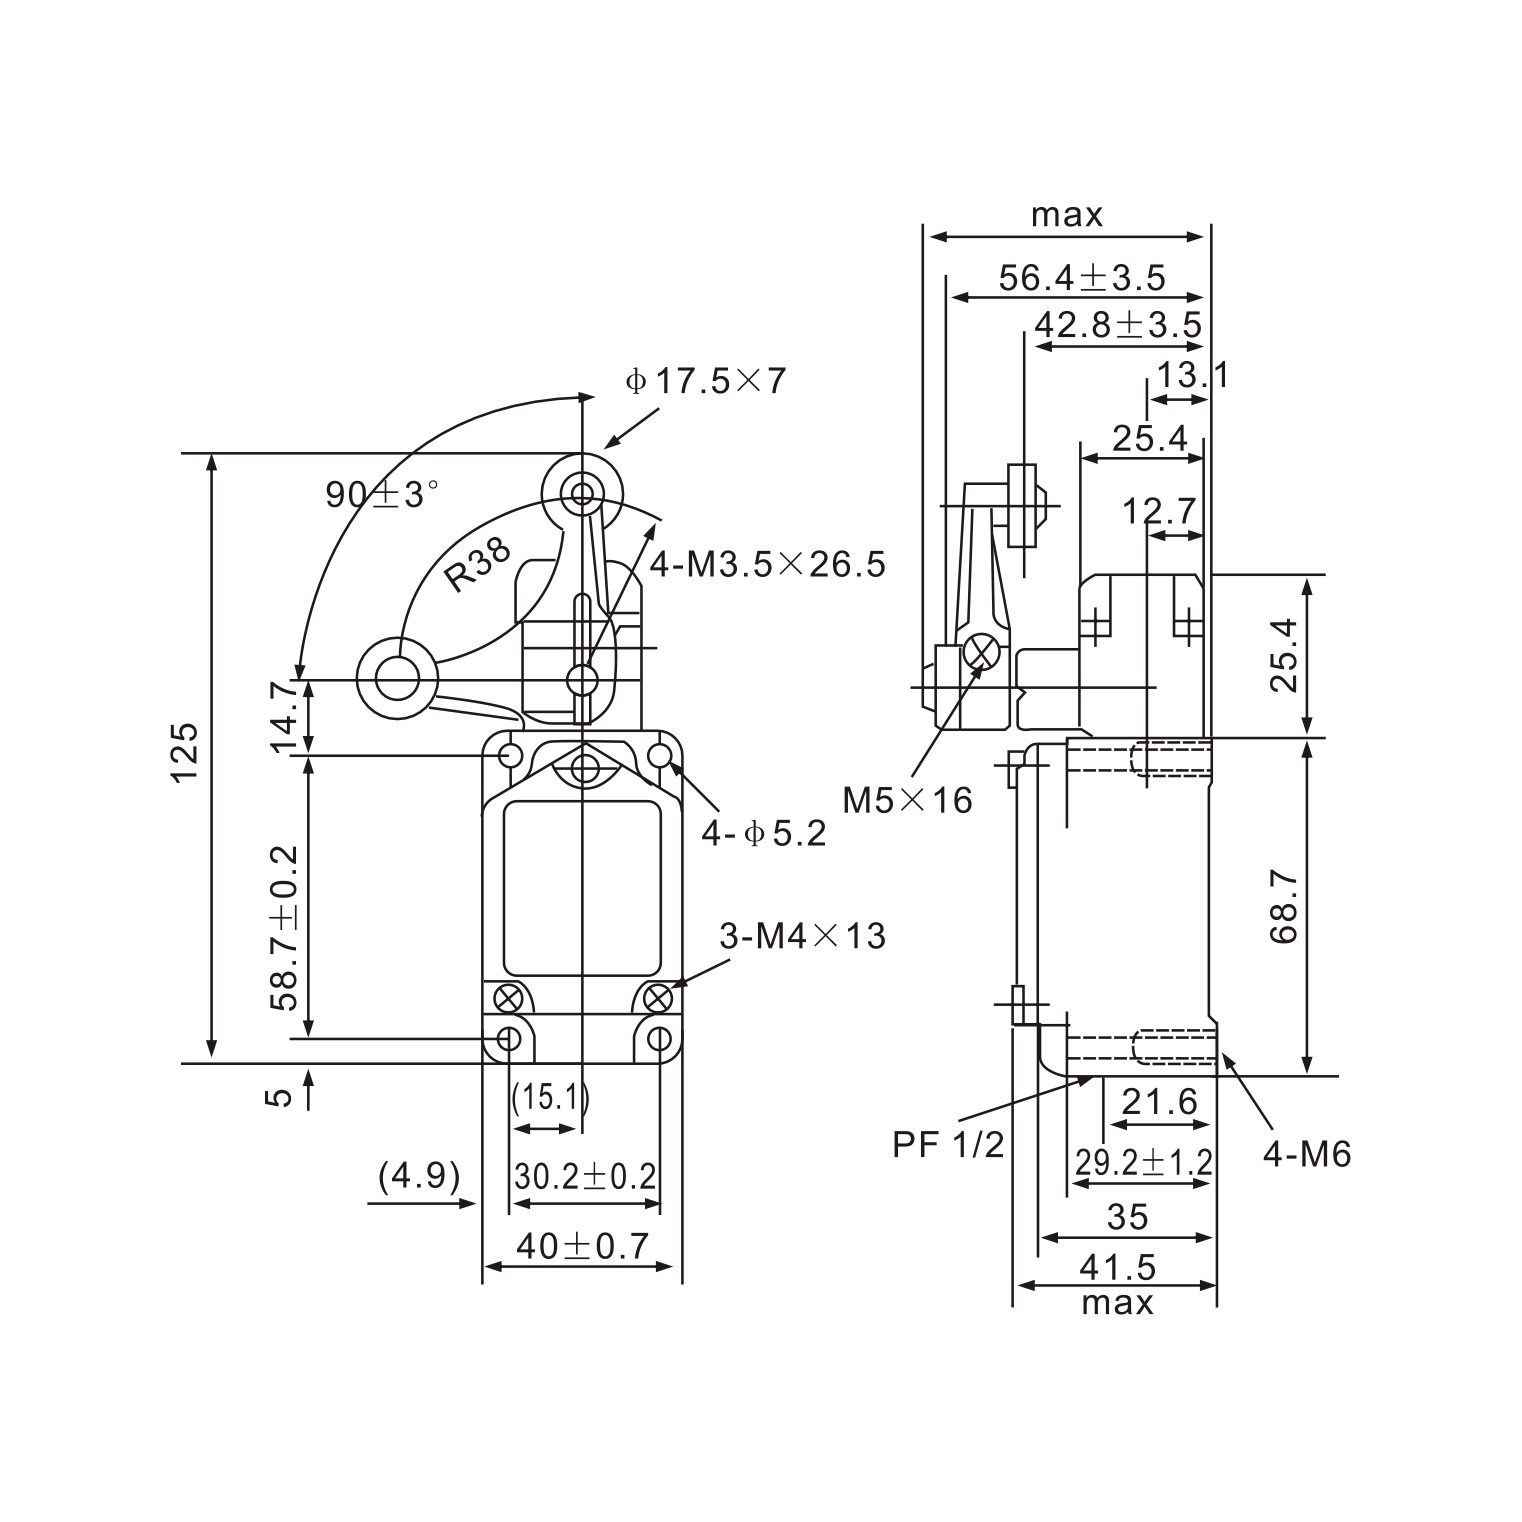 WLCA32-41 Adjustable Stainless Steel Roller Limit Switch Diagram